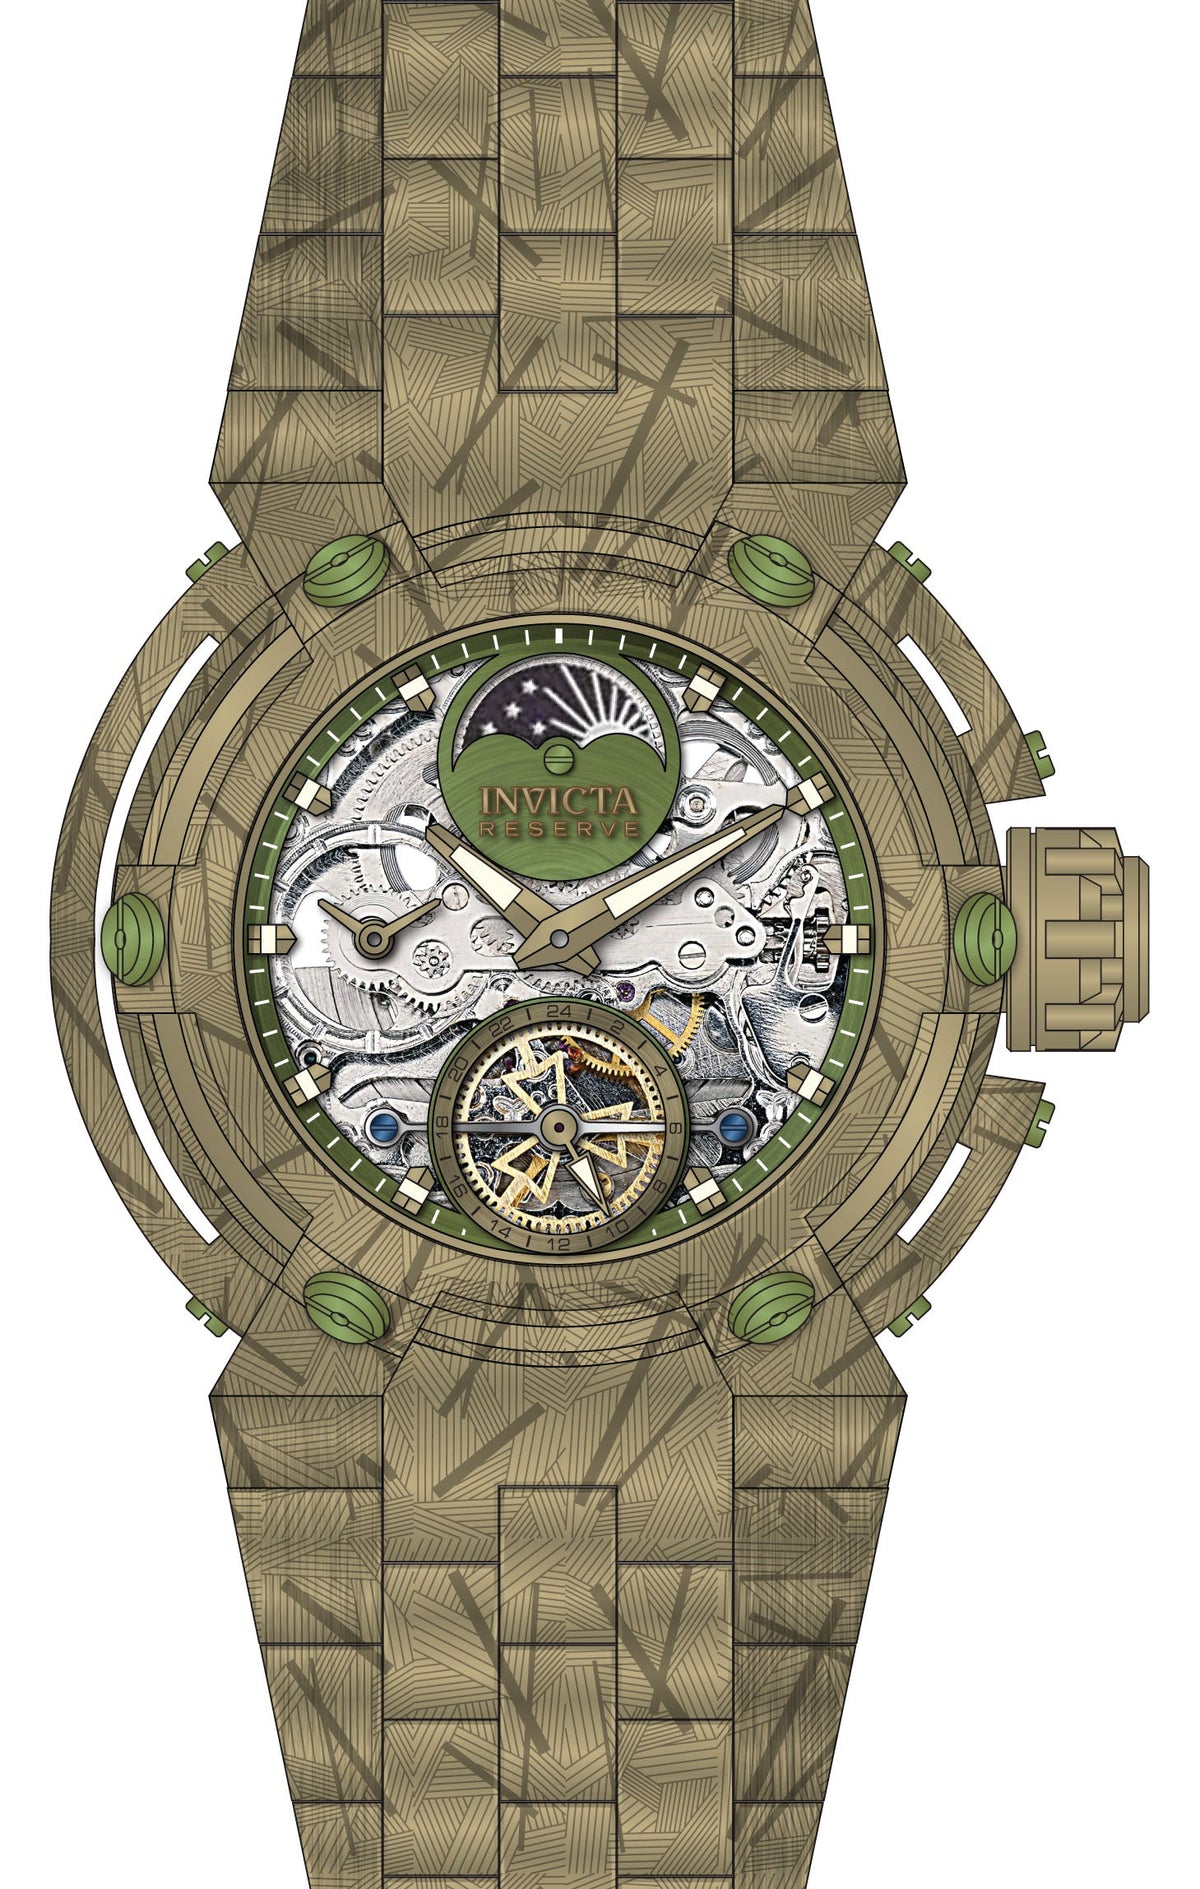 Band For Invicta Coalition Forces X-Wing Men 44442 - Invicta Watch 